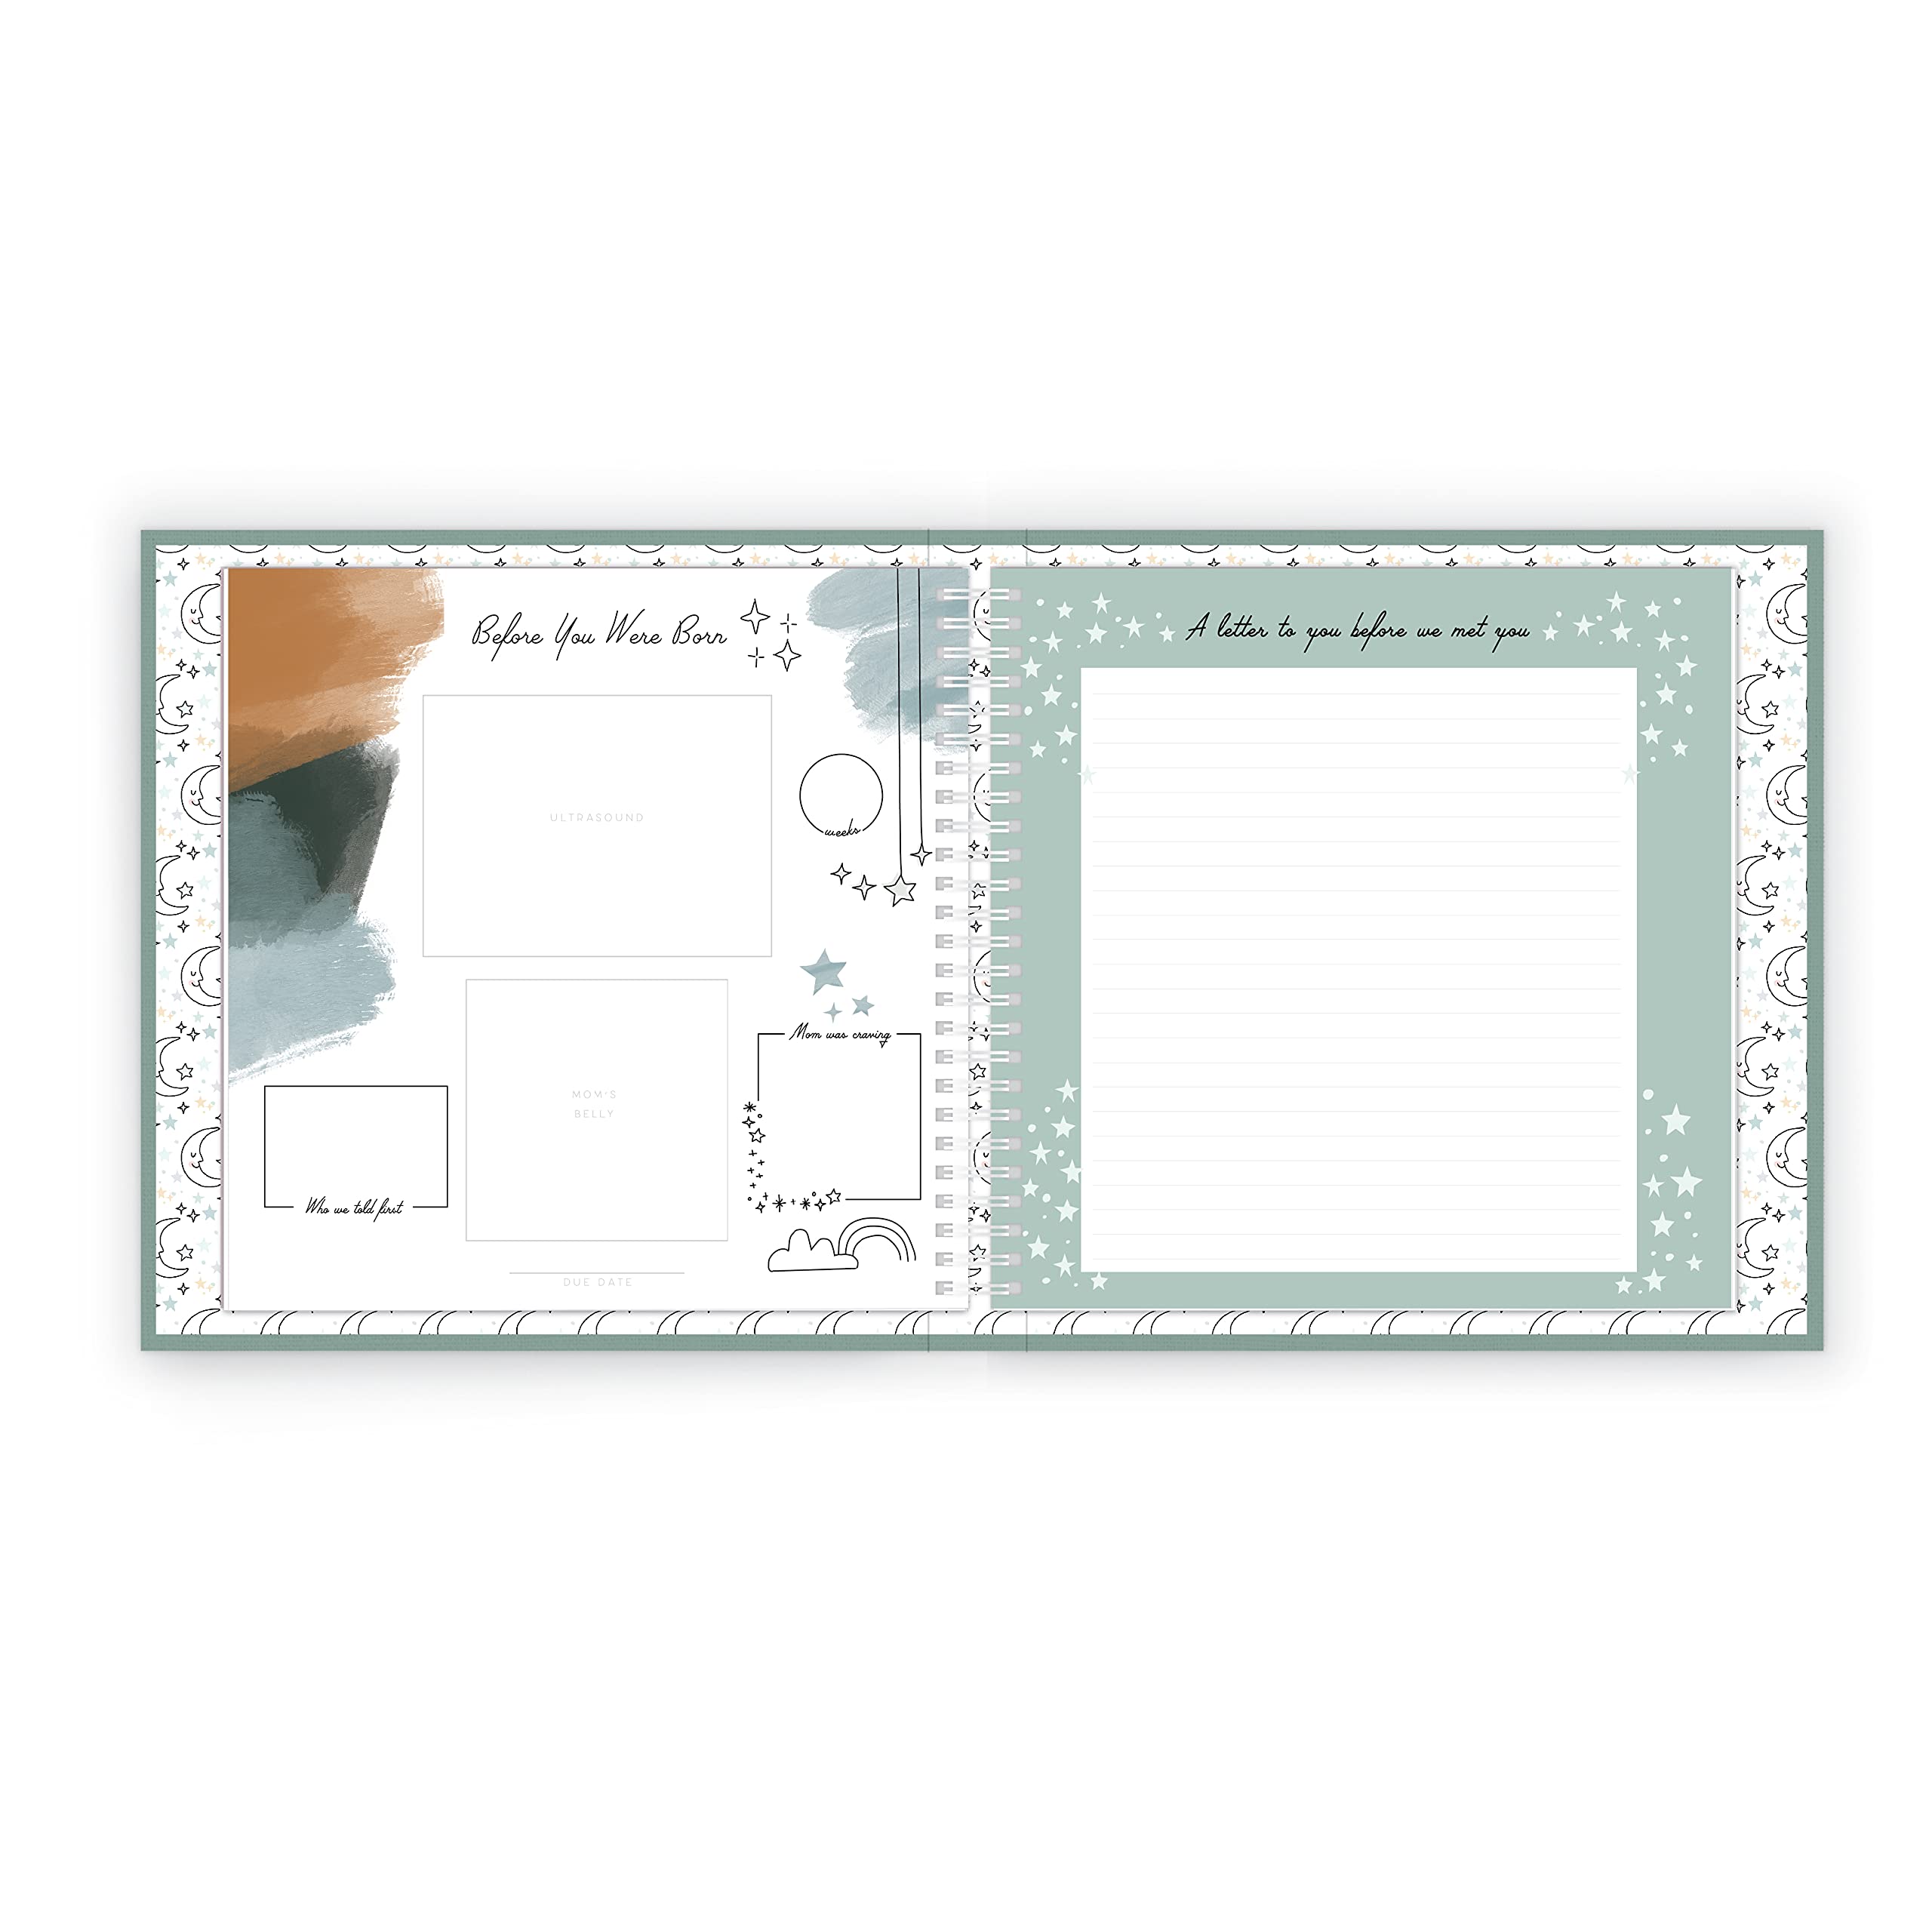 Lucy Darling Celestial Skies Theme Luxury Baby Memory Book - First Year Journal Album Photo Book To Capture Precious Memories - Keepsake Pregnancy Baby Record Book For Boy Or Girl